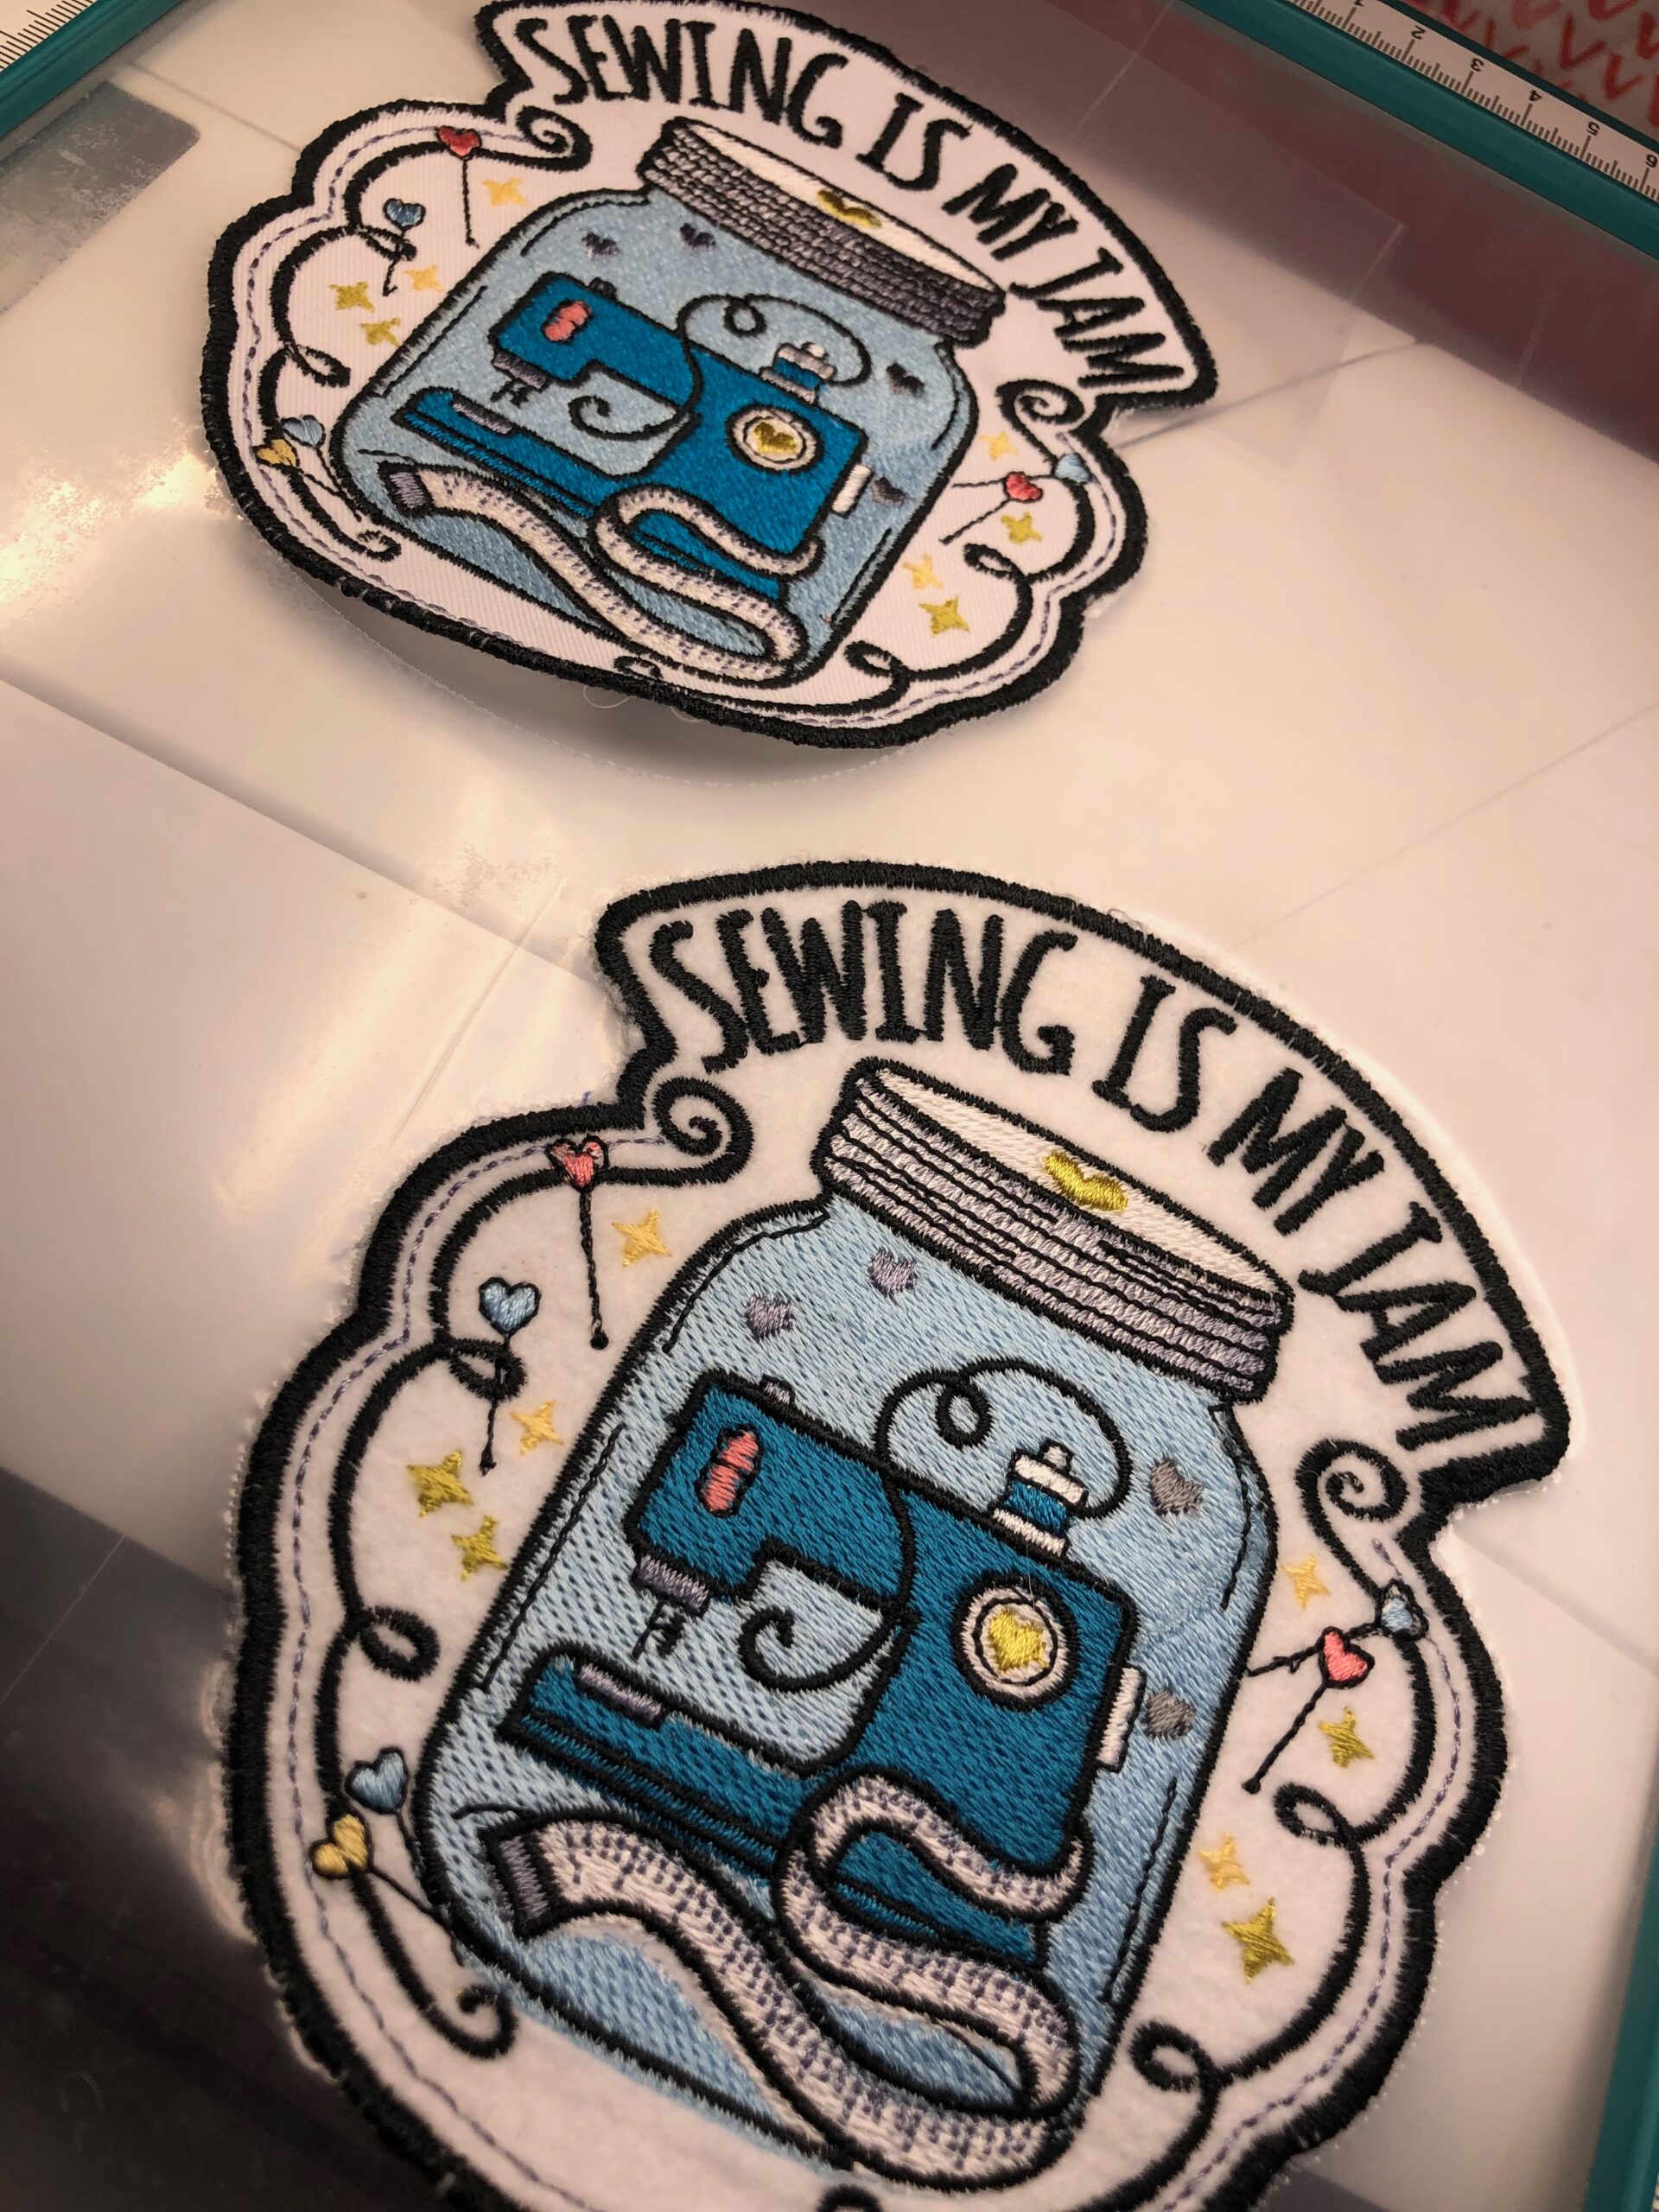 Any tips for sewing on patches? The patch is pretty thick : r/sewing